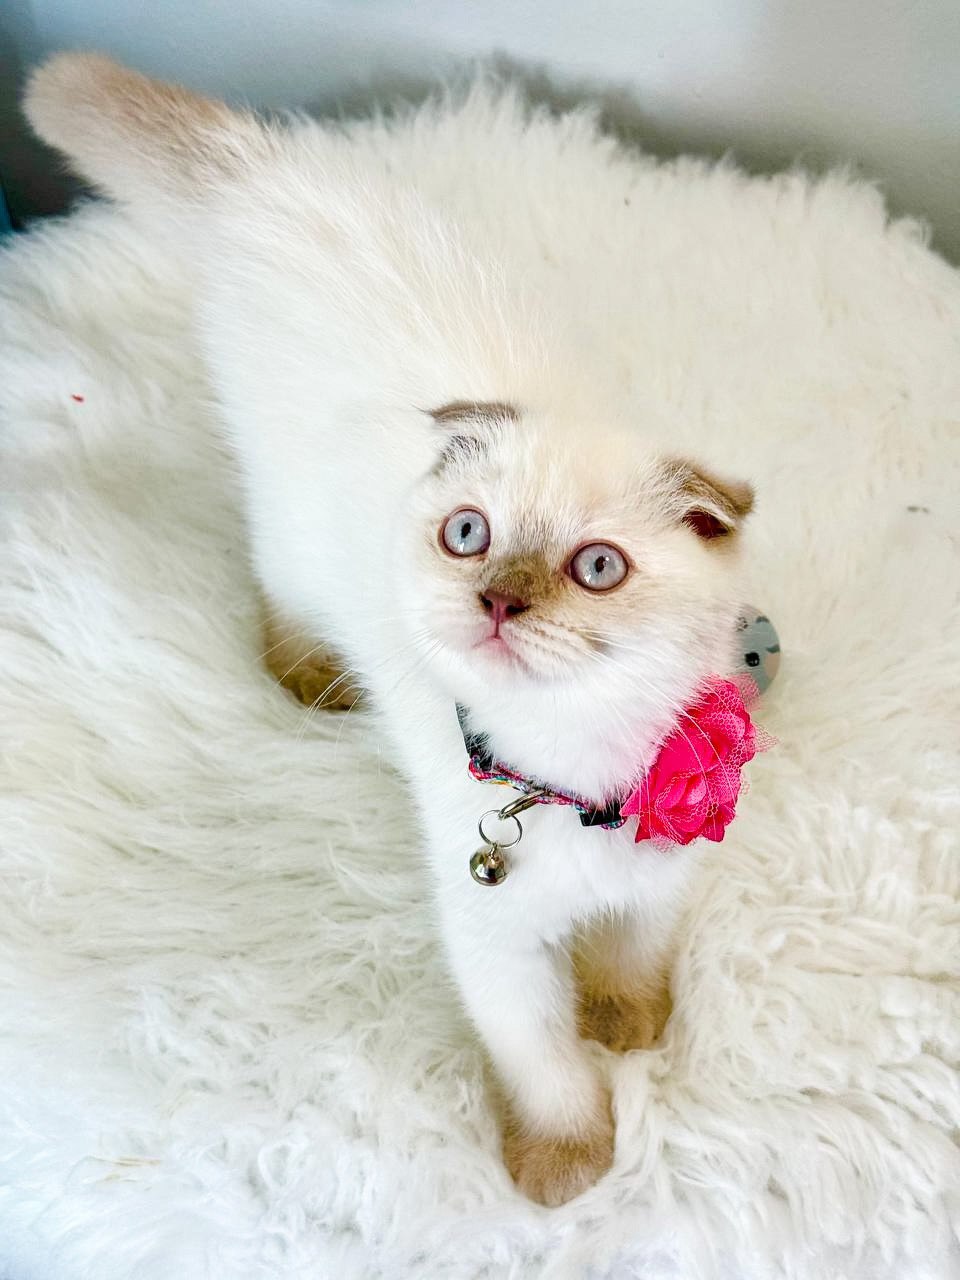 Her playful eyes and lively nature will make your heart flutter with delight. She is full of energy and ready to shower you with lots of affection and adorableness.